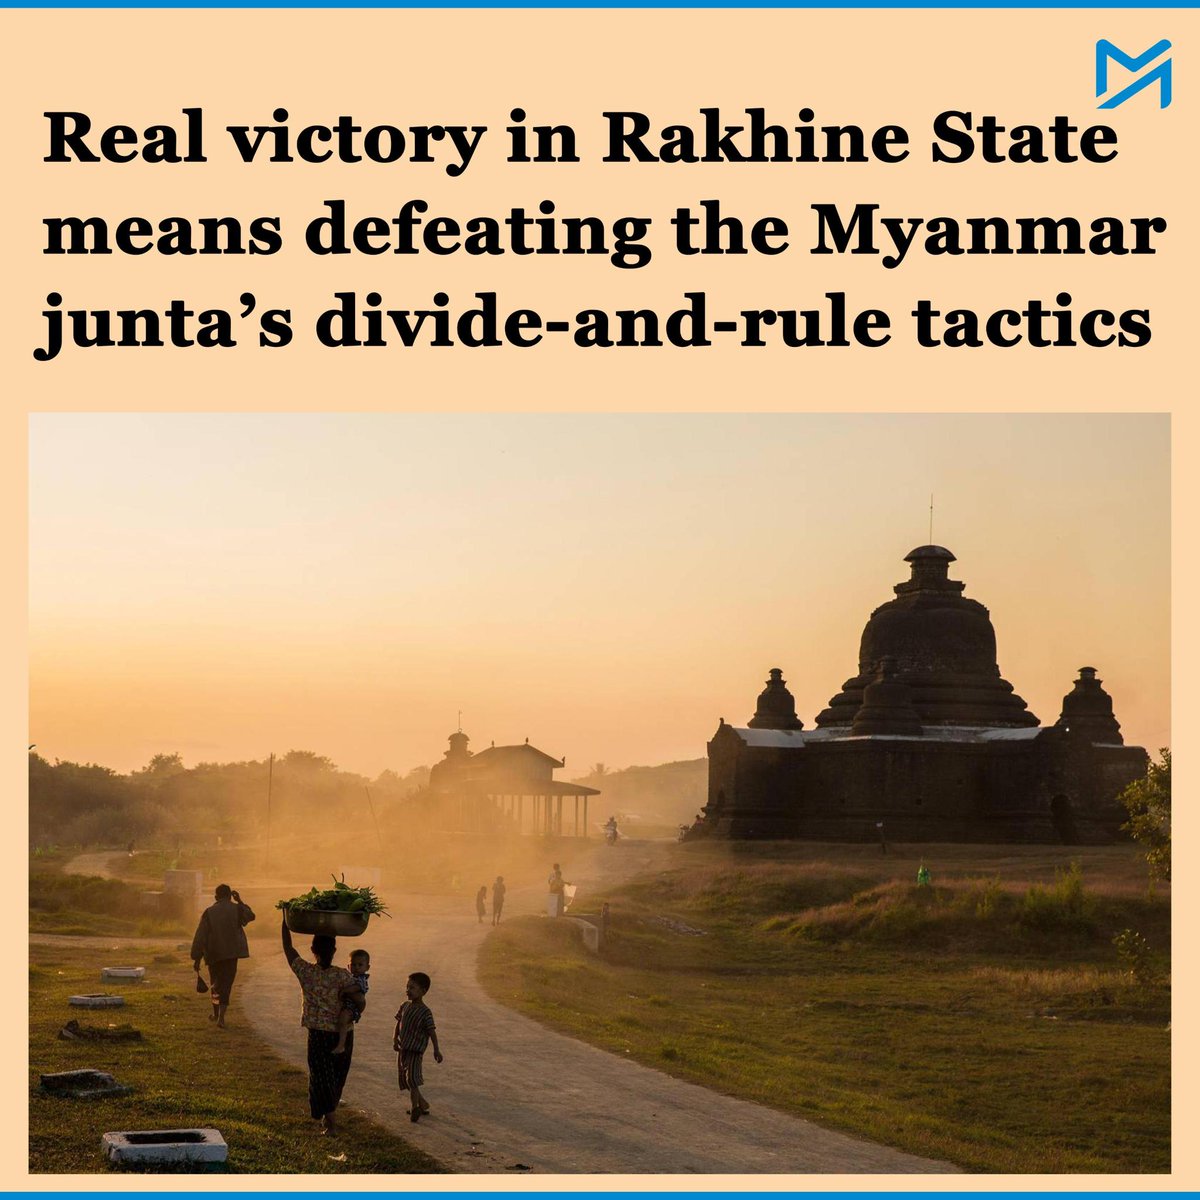 As its offensive continues, the Arakan Army will have to avoid falling into a trap set by a regime intent upon exploiting tensions between the state’s Rakhine and Rohingya communities Read More : myanmar-now.org/en/news/real-v… #Myanmar